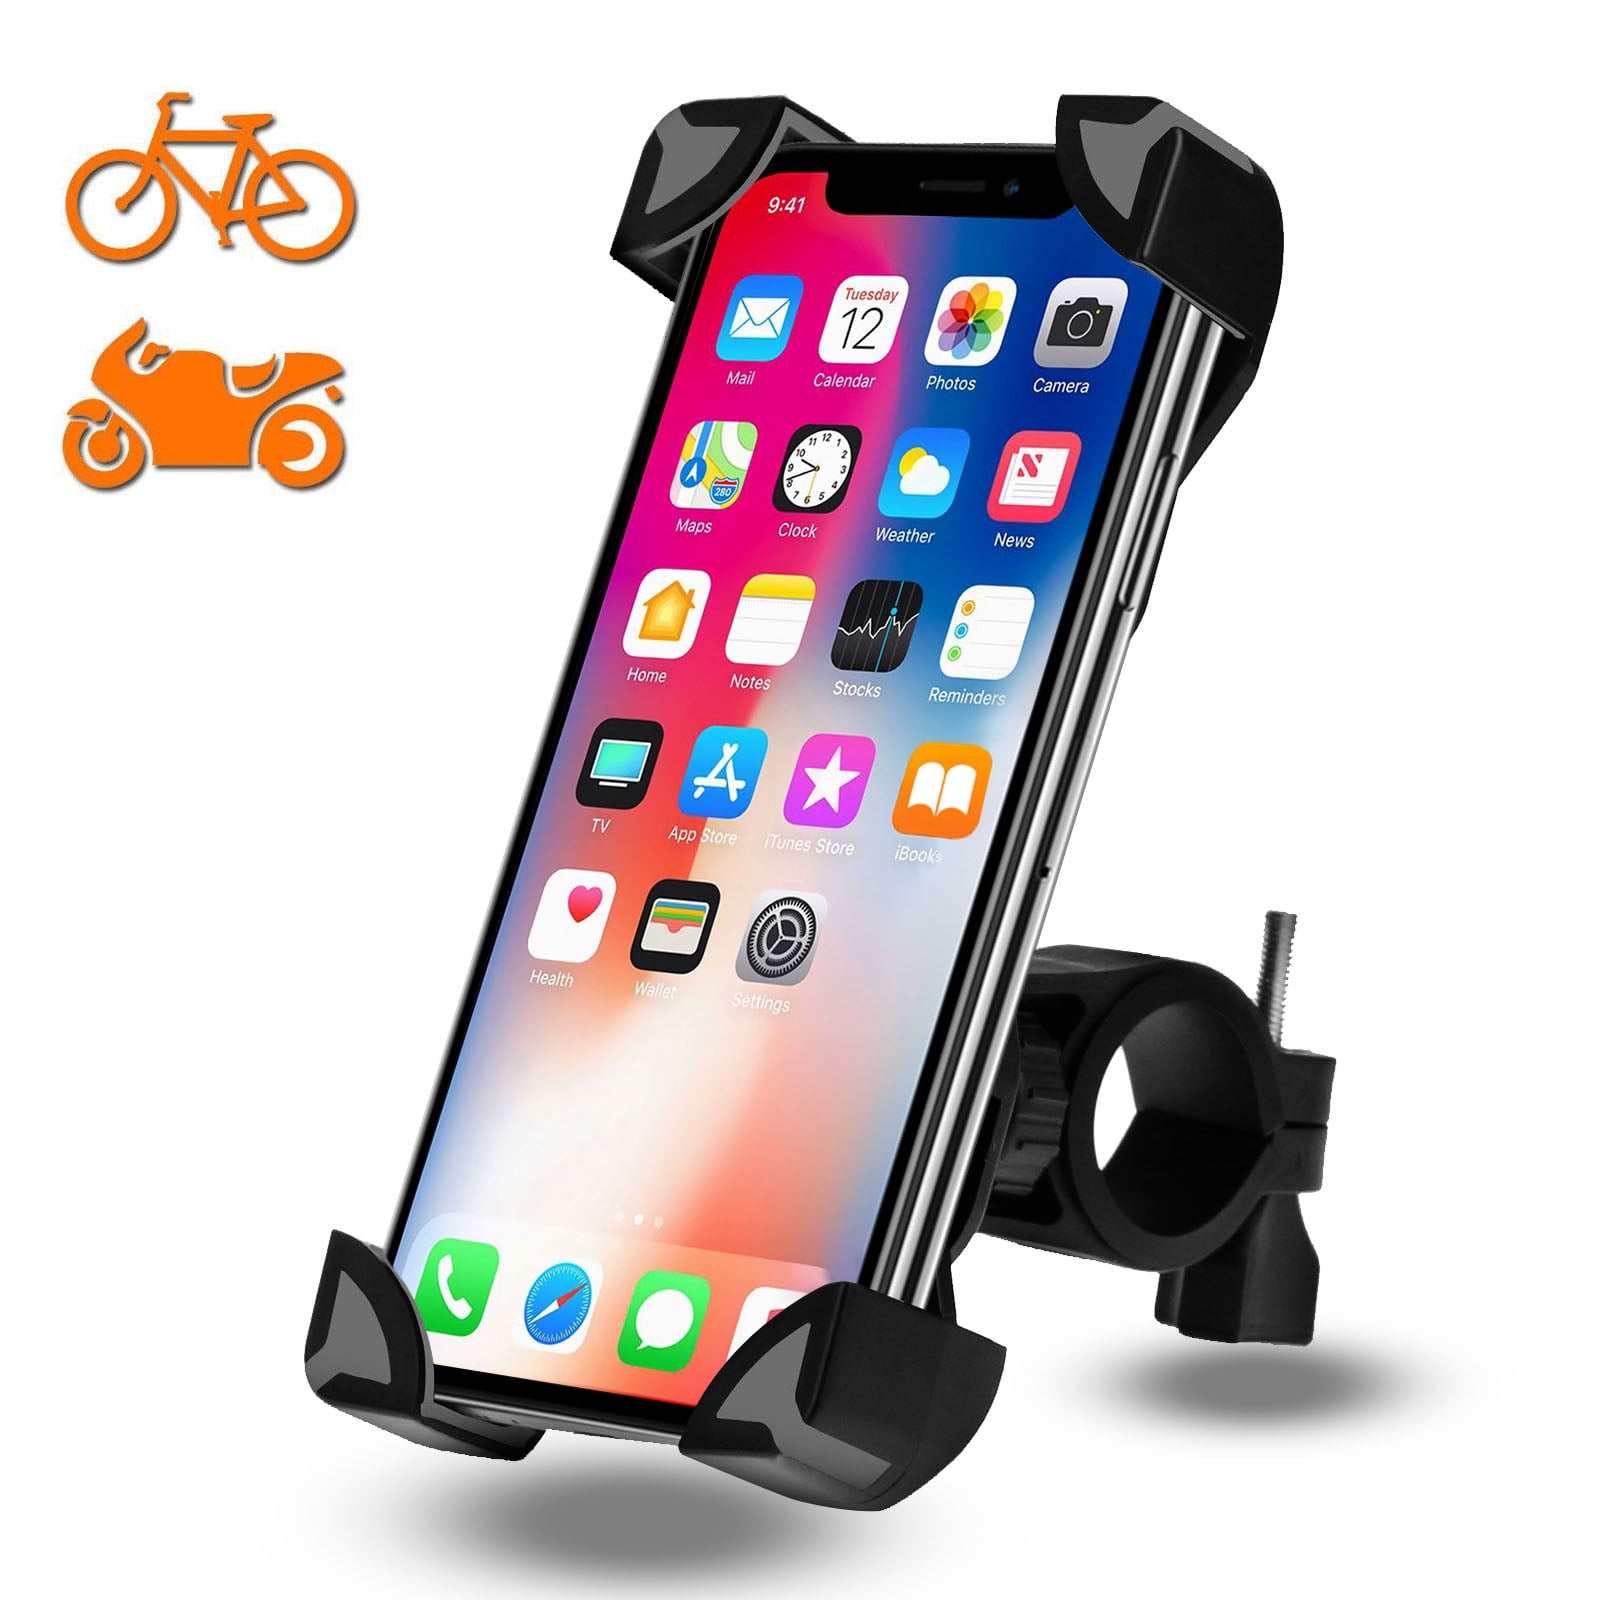 Maxitino Bike Phone Mount Universal Adjustable Motorcycle Bicycle Aluminum Alloy Cell Phone Holder for iPhone X 8 7 6 Plus,Samsung Galaxy S7 S8 S9 Note 7 8 9 Black 